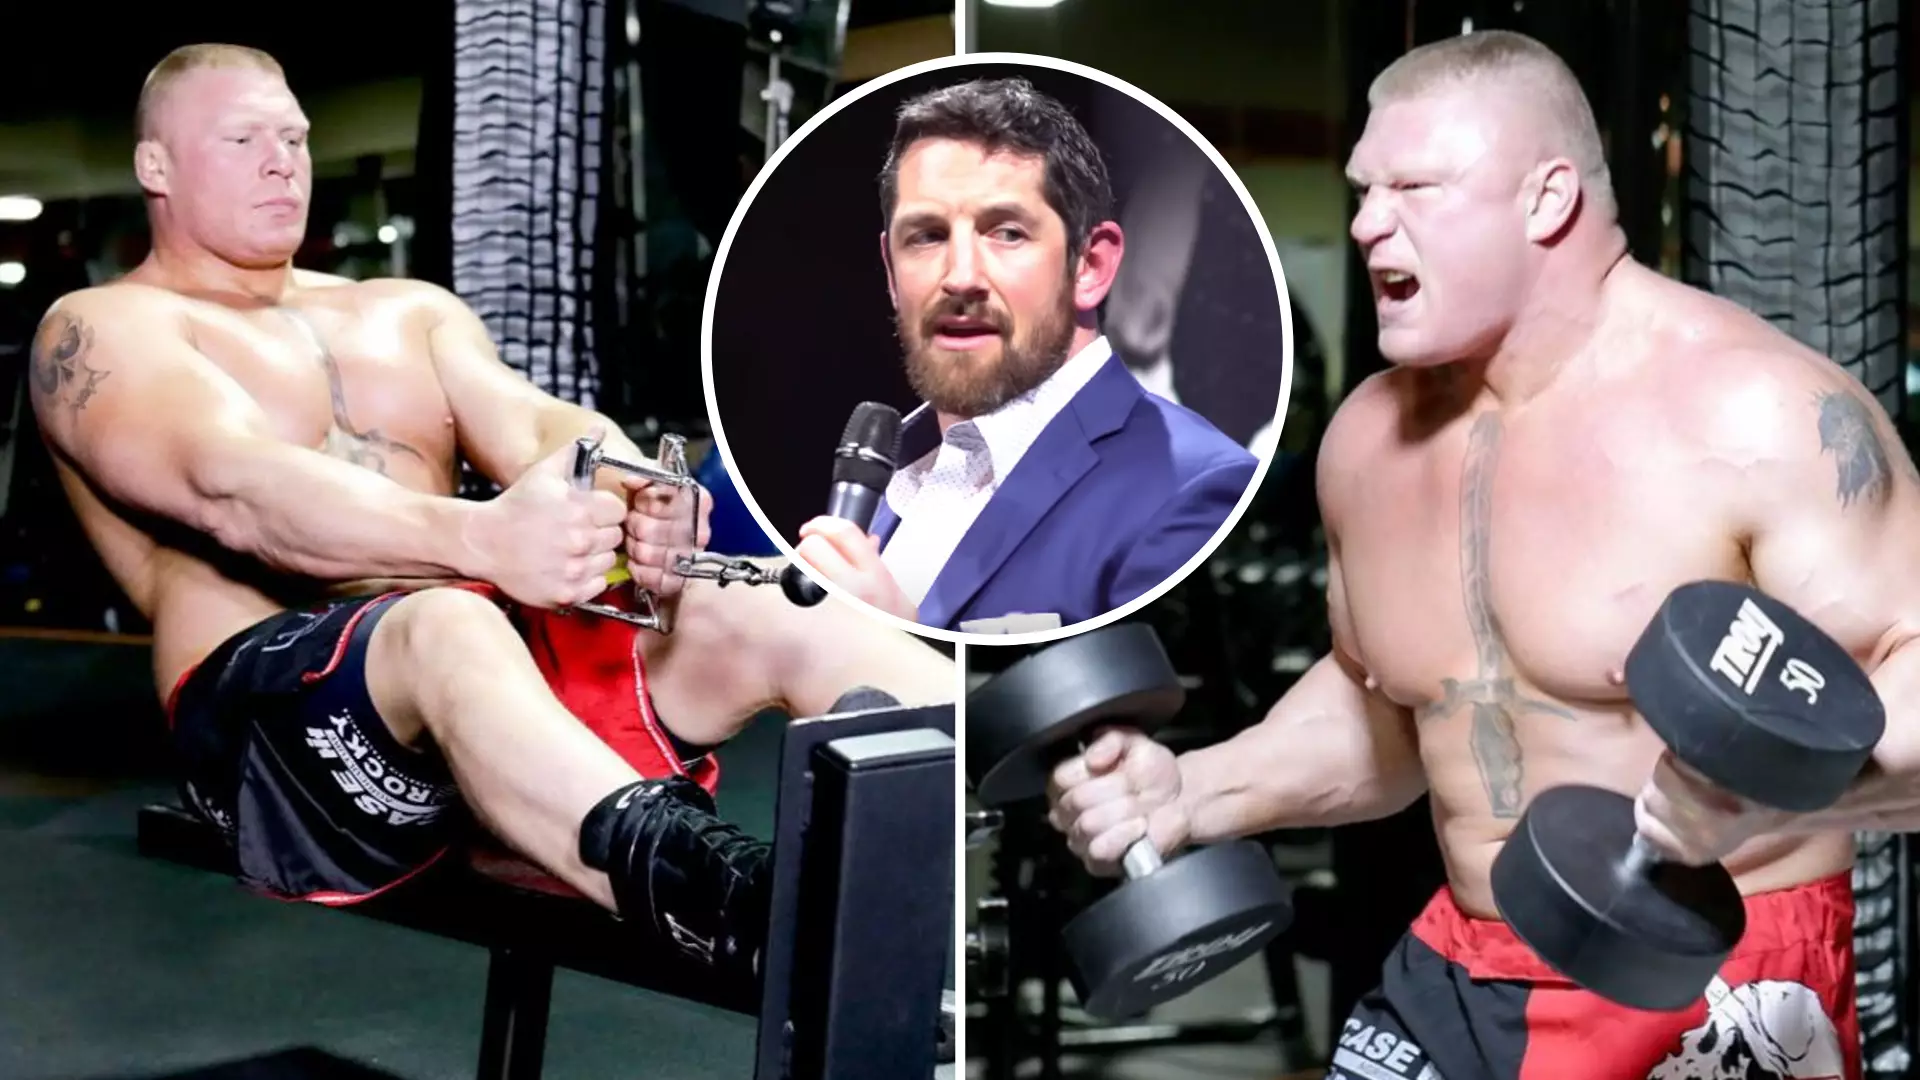 Brock Lesnar Terrified Fan In Gym By Asking If He Was 'Trying To See My F*****g Penis,' Says Wade Barrett